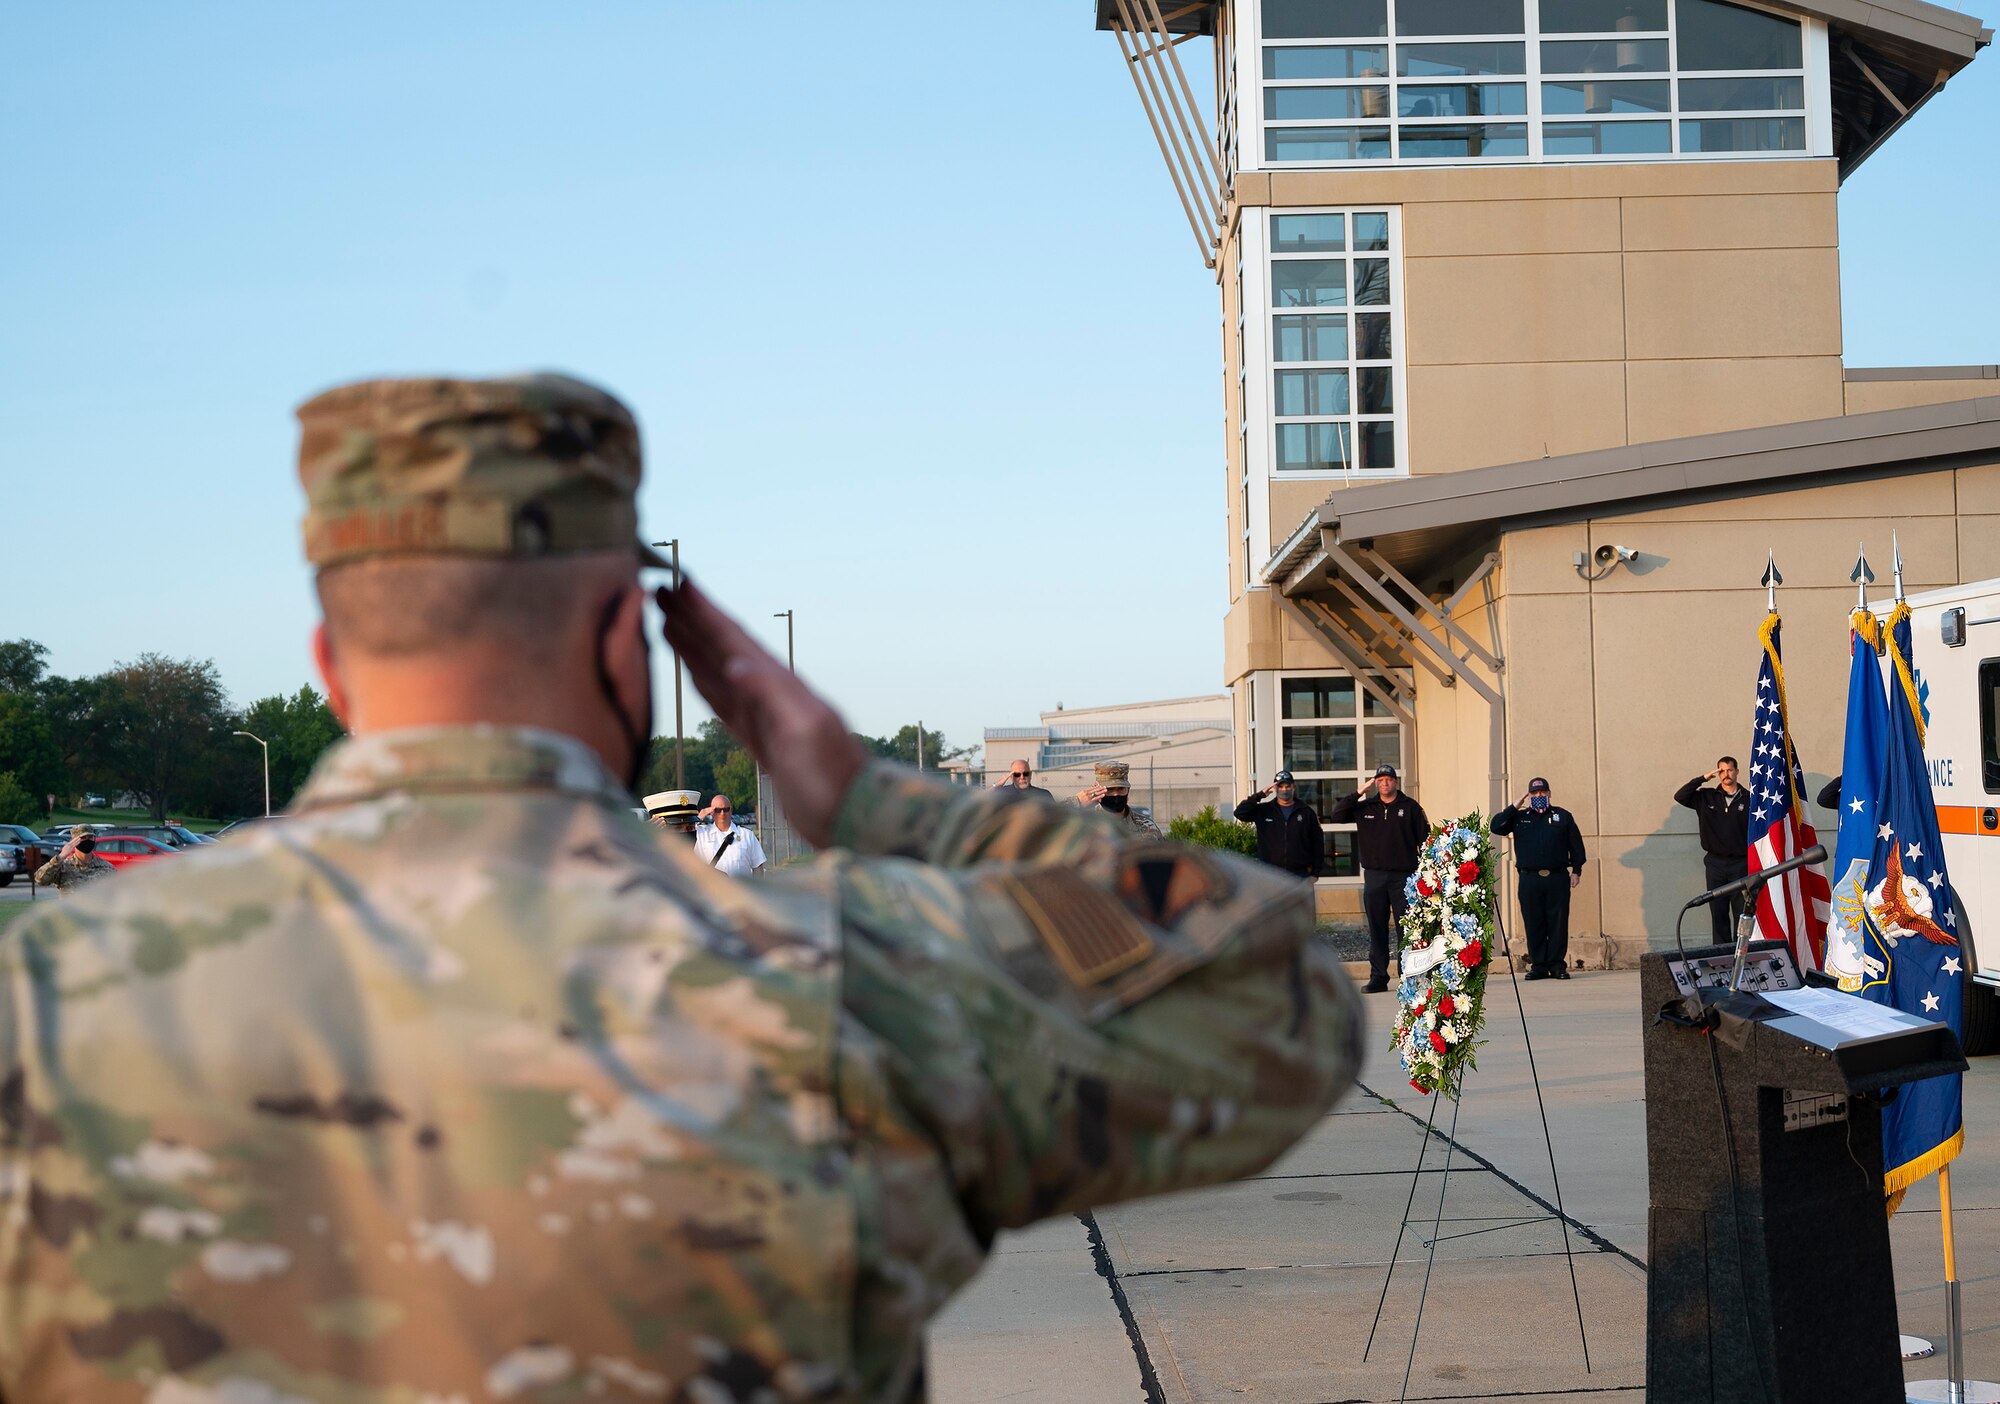 Col. Patrick Miller, 88th Air Base Wing and installation commander, salutes Sept. 10, 2021, during the playing of taps at the Wright-Patterson Air Force Base, Ohio, ceremony commemorating the 20th anniversary of the 9/11 attacks. Miller gave the keynote address, praising heroics of the first responders that day and how they continue to inspire. (U.S. Air Force photo by R.J. Oriez)